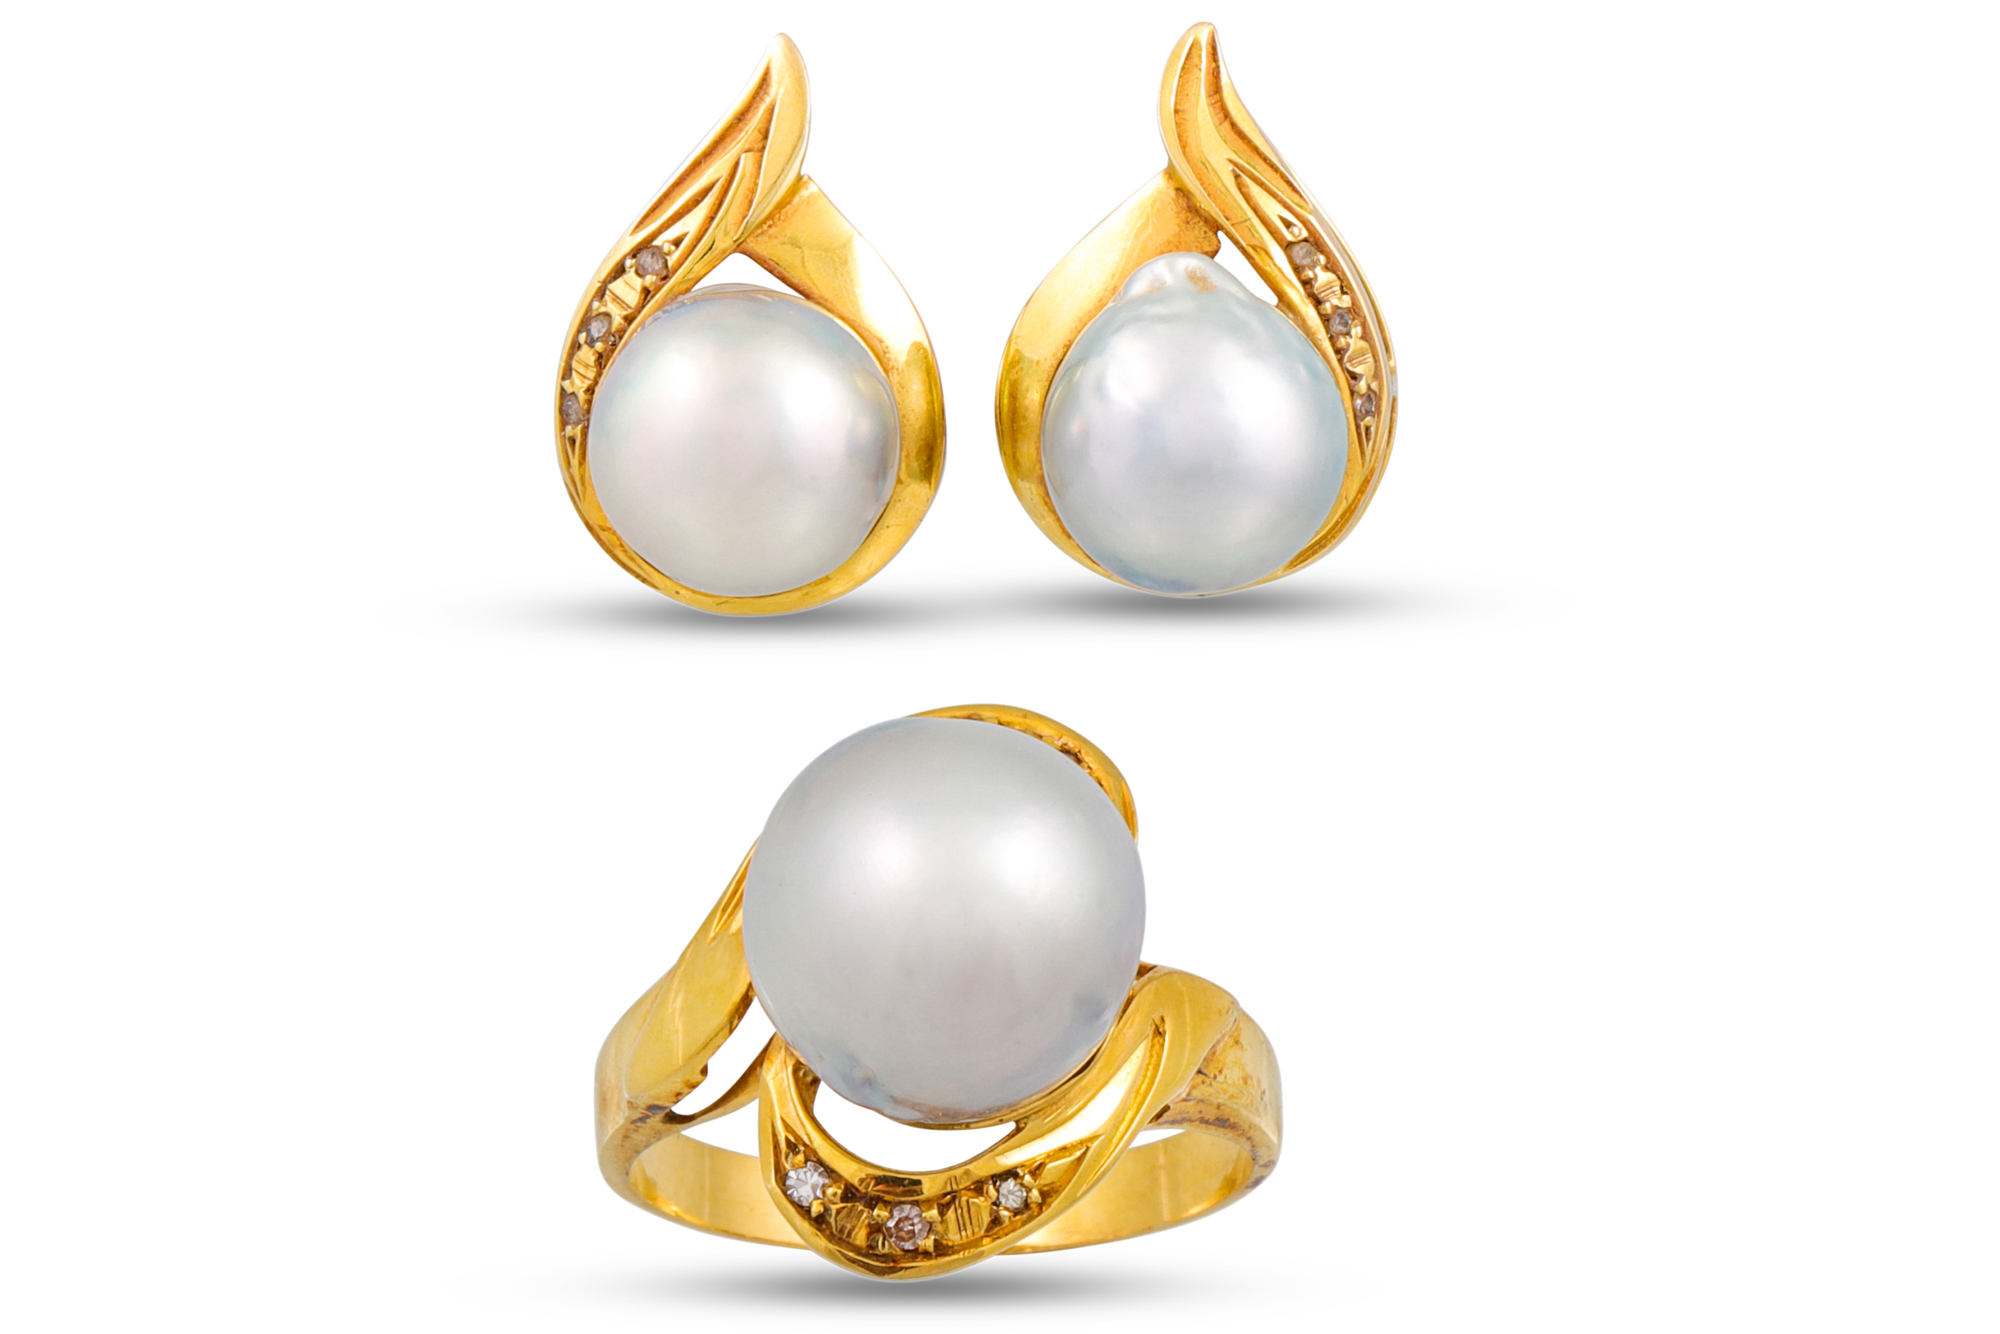 A CULTURED PEARL RING, grey tones, mounted in yellow gold, together with a pair of matching